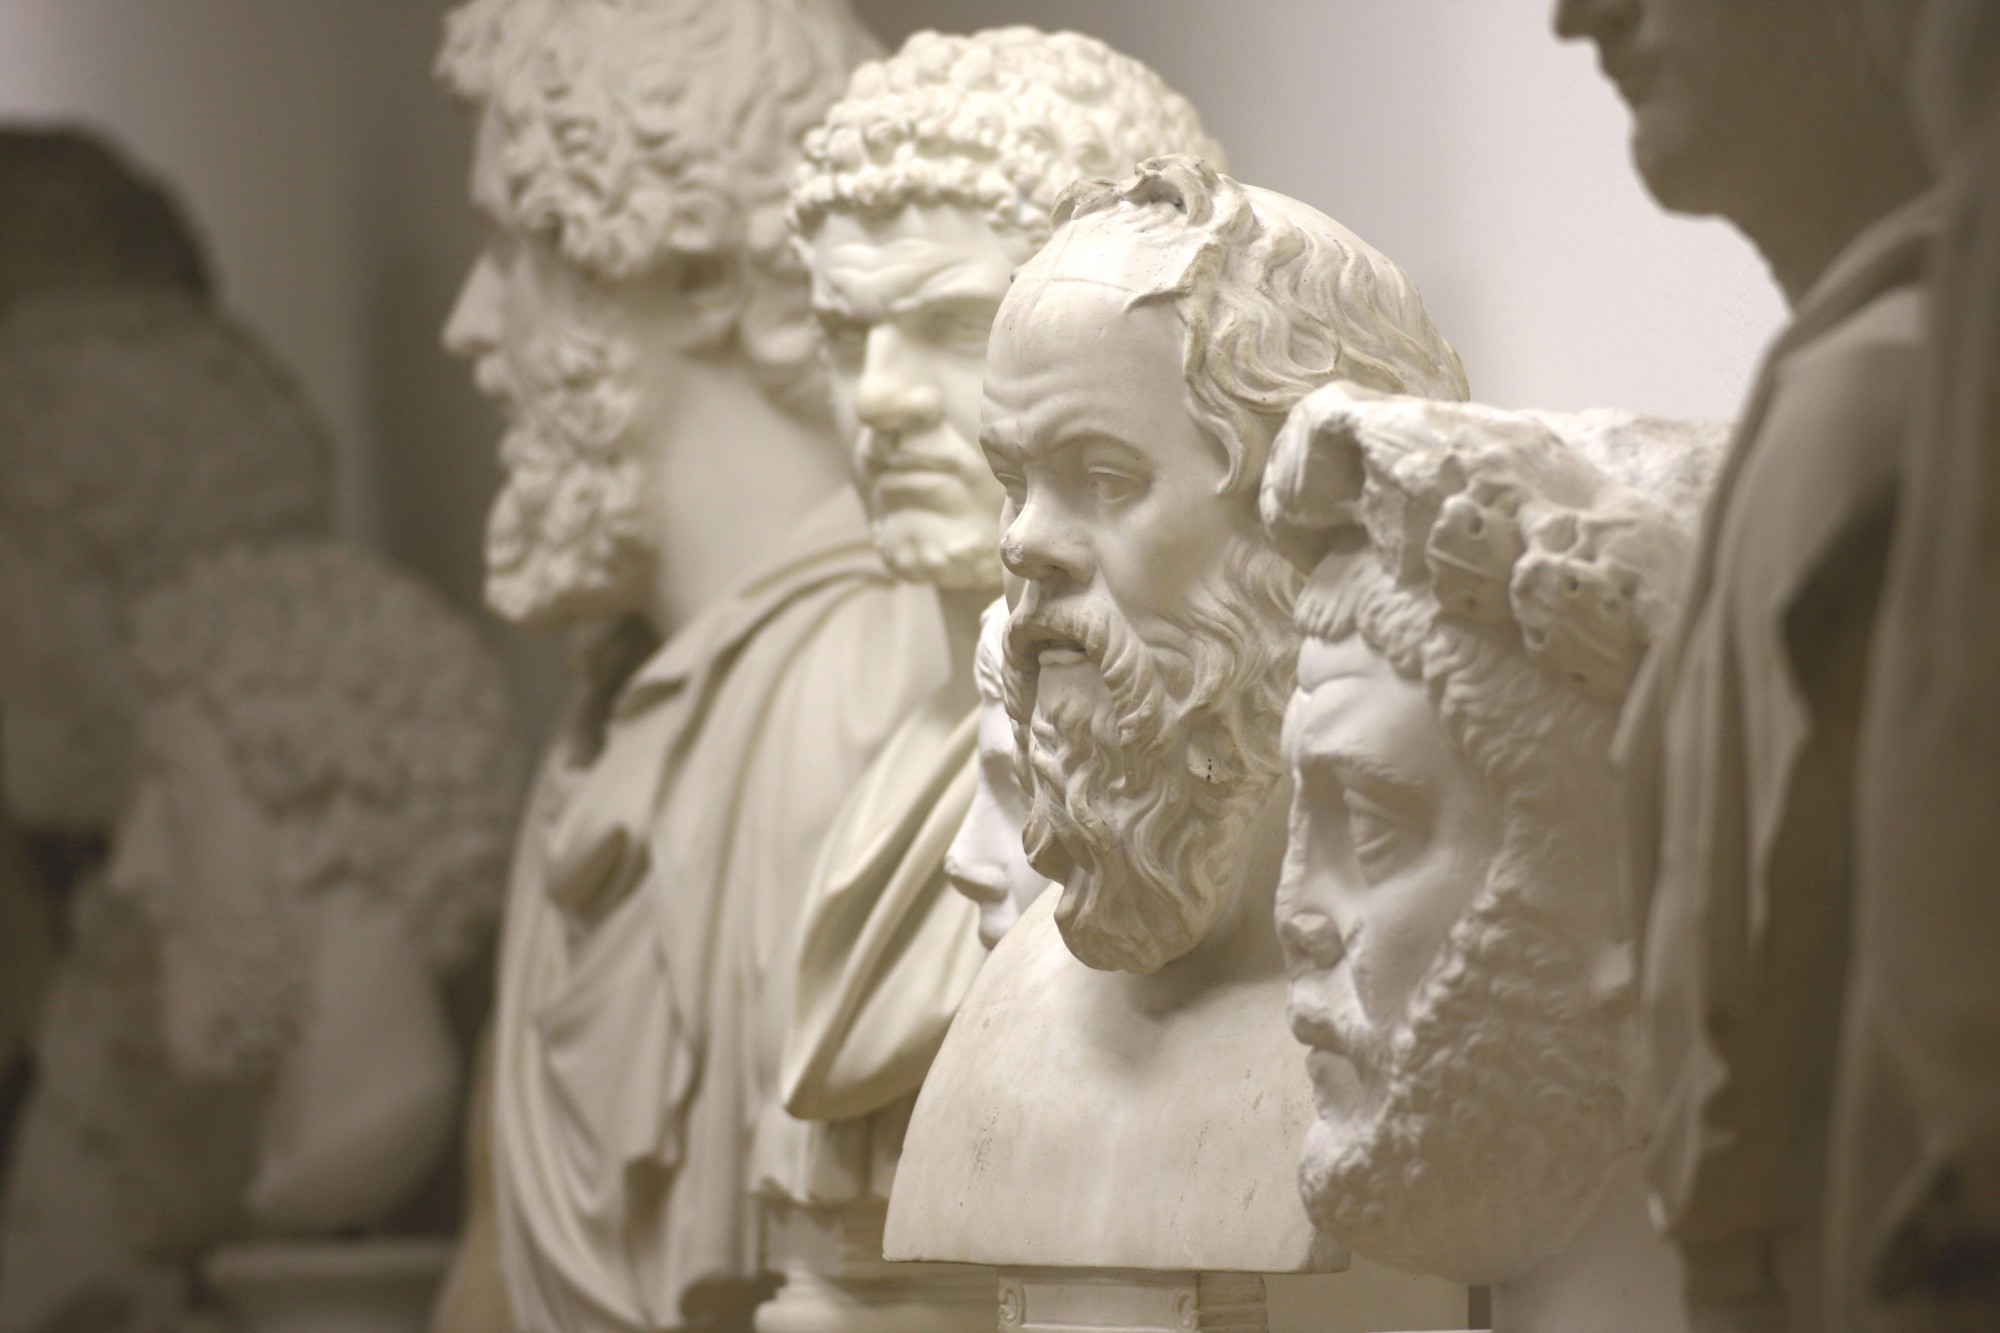 Portrait gallery in the collection of plaster casts with Roman emperors and Greek philosophers (Image: Georg Pöhlein)